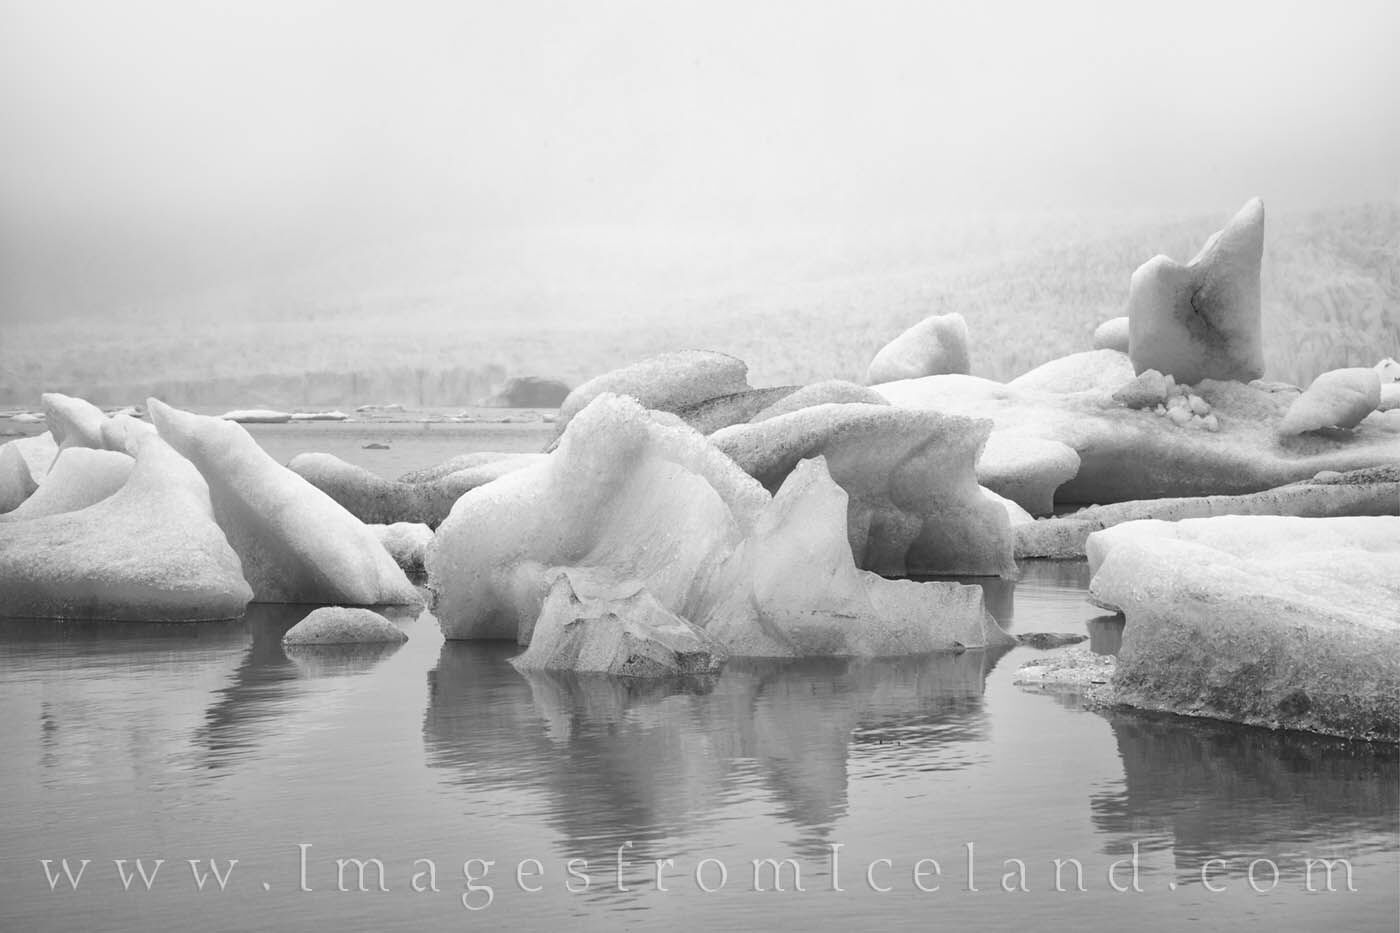 Fjallsárlón Glacier icebergs float in cold waters on a gray, cold, rainy summer day in south Iceland in this black and white...